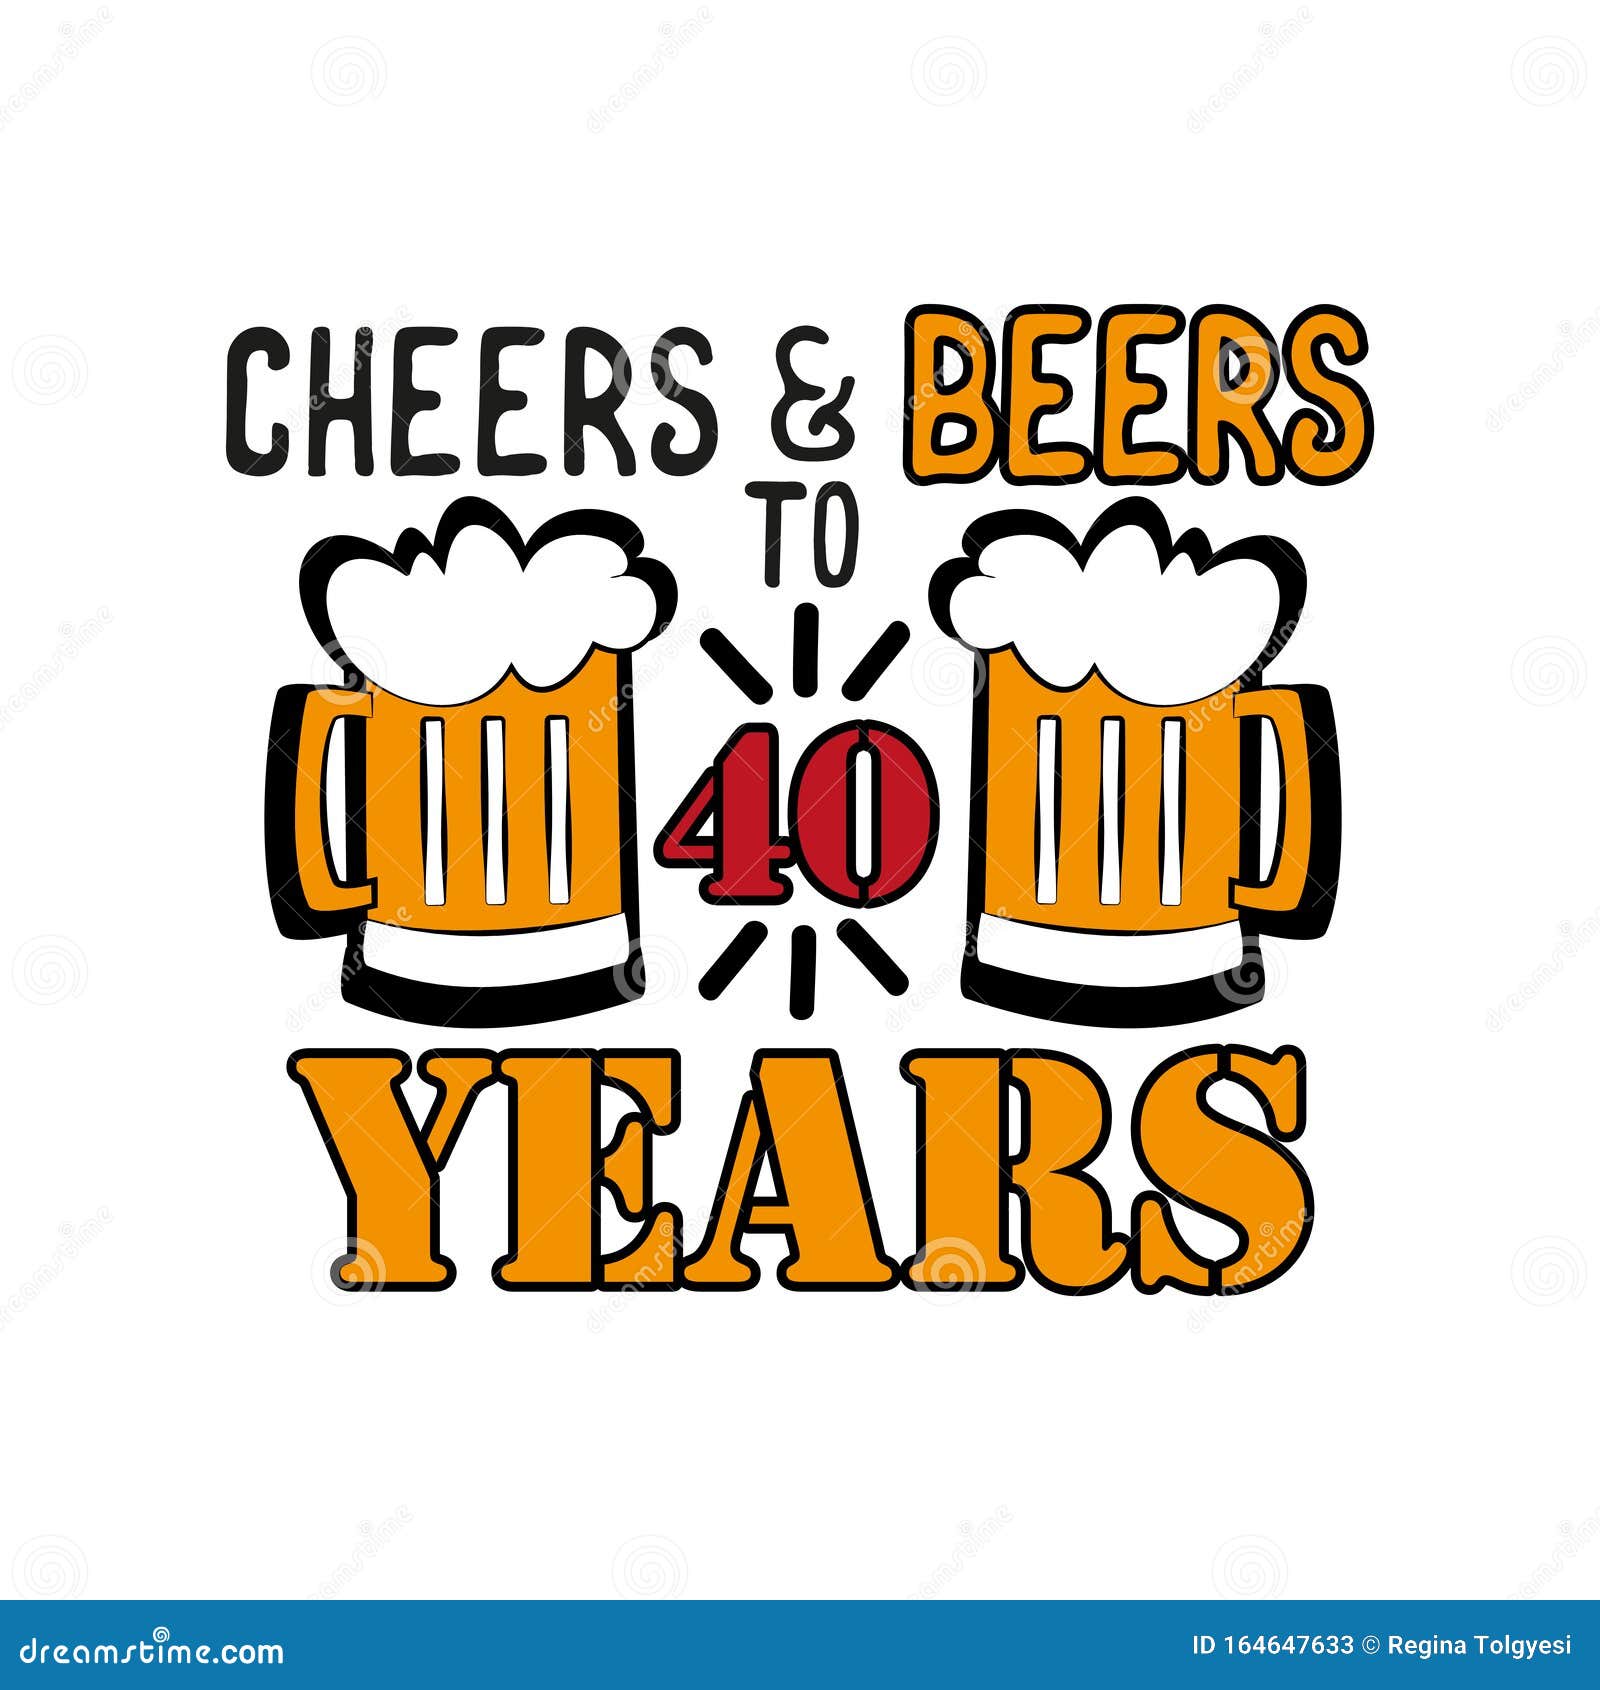 cheers-and-beers-to-40-years-funny-birthday-text-with-beer-mug-stock